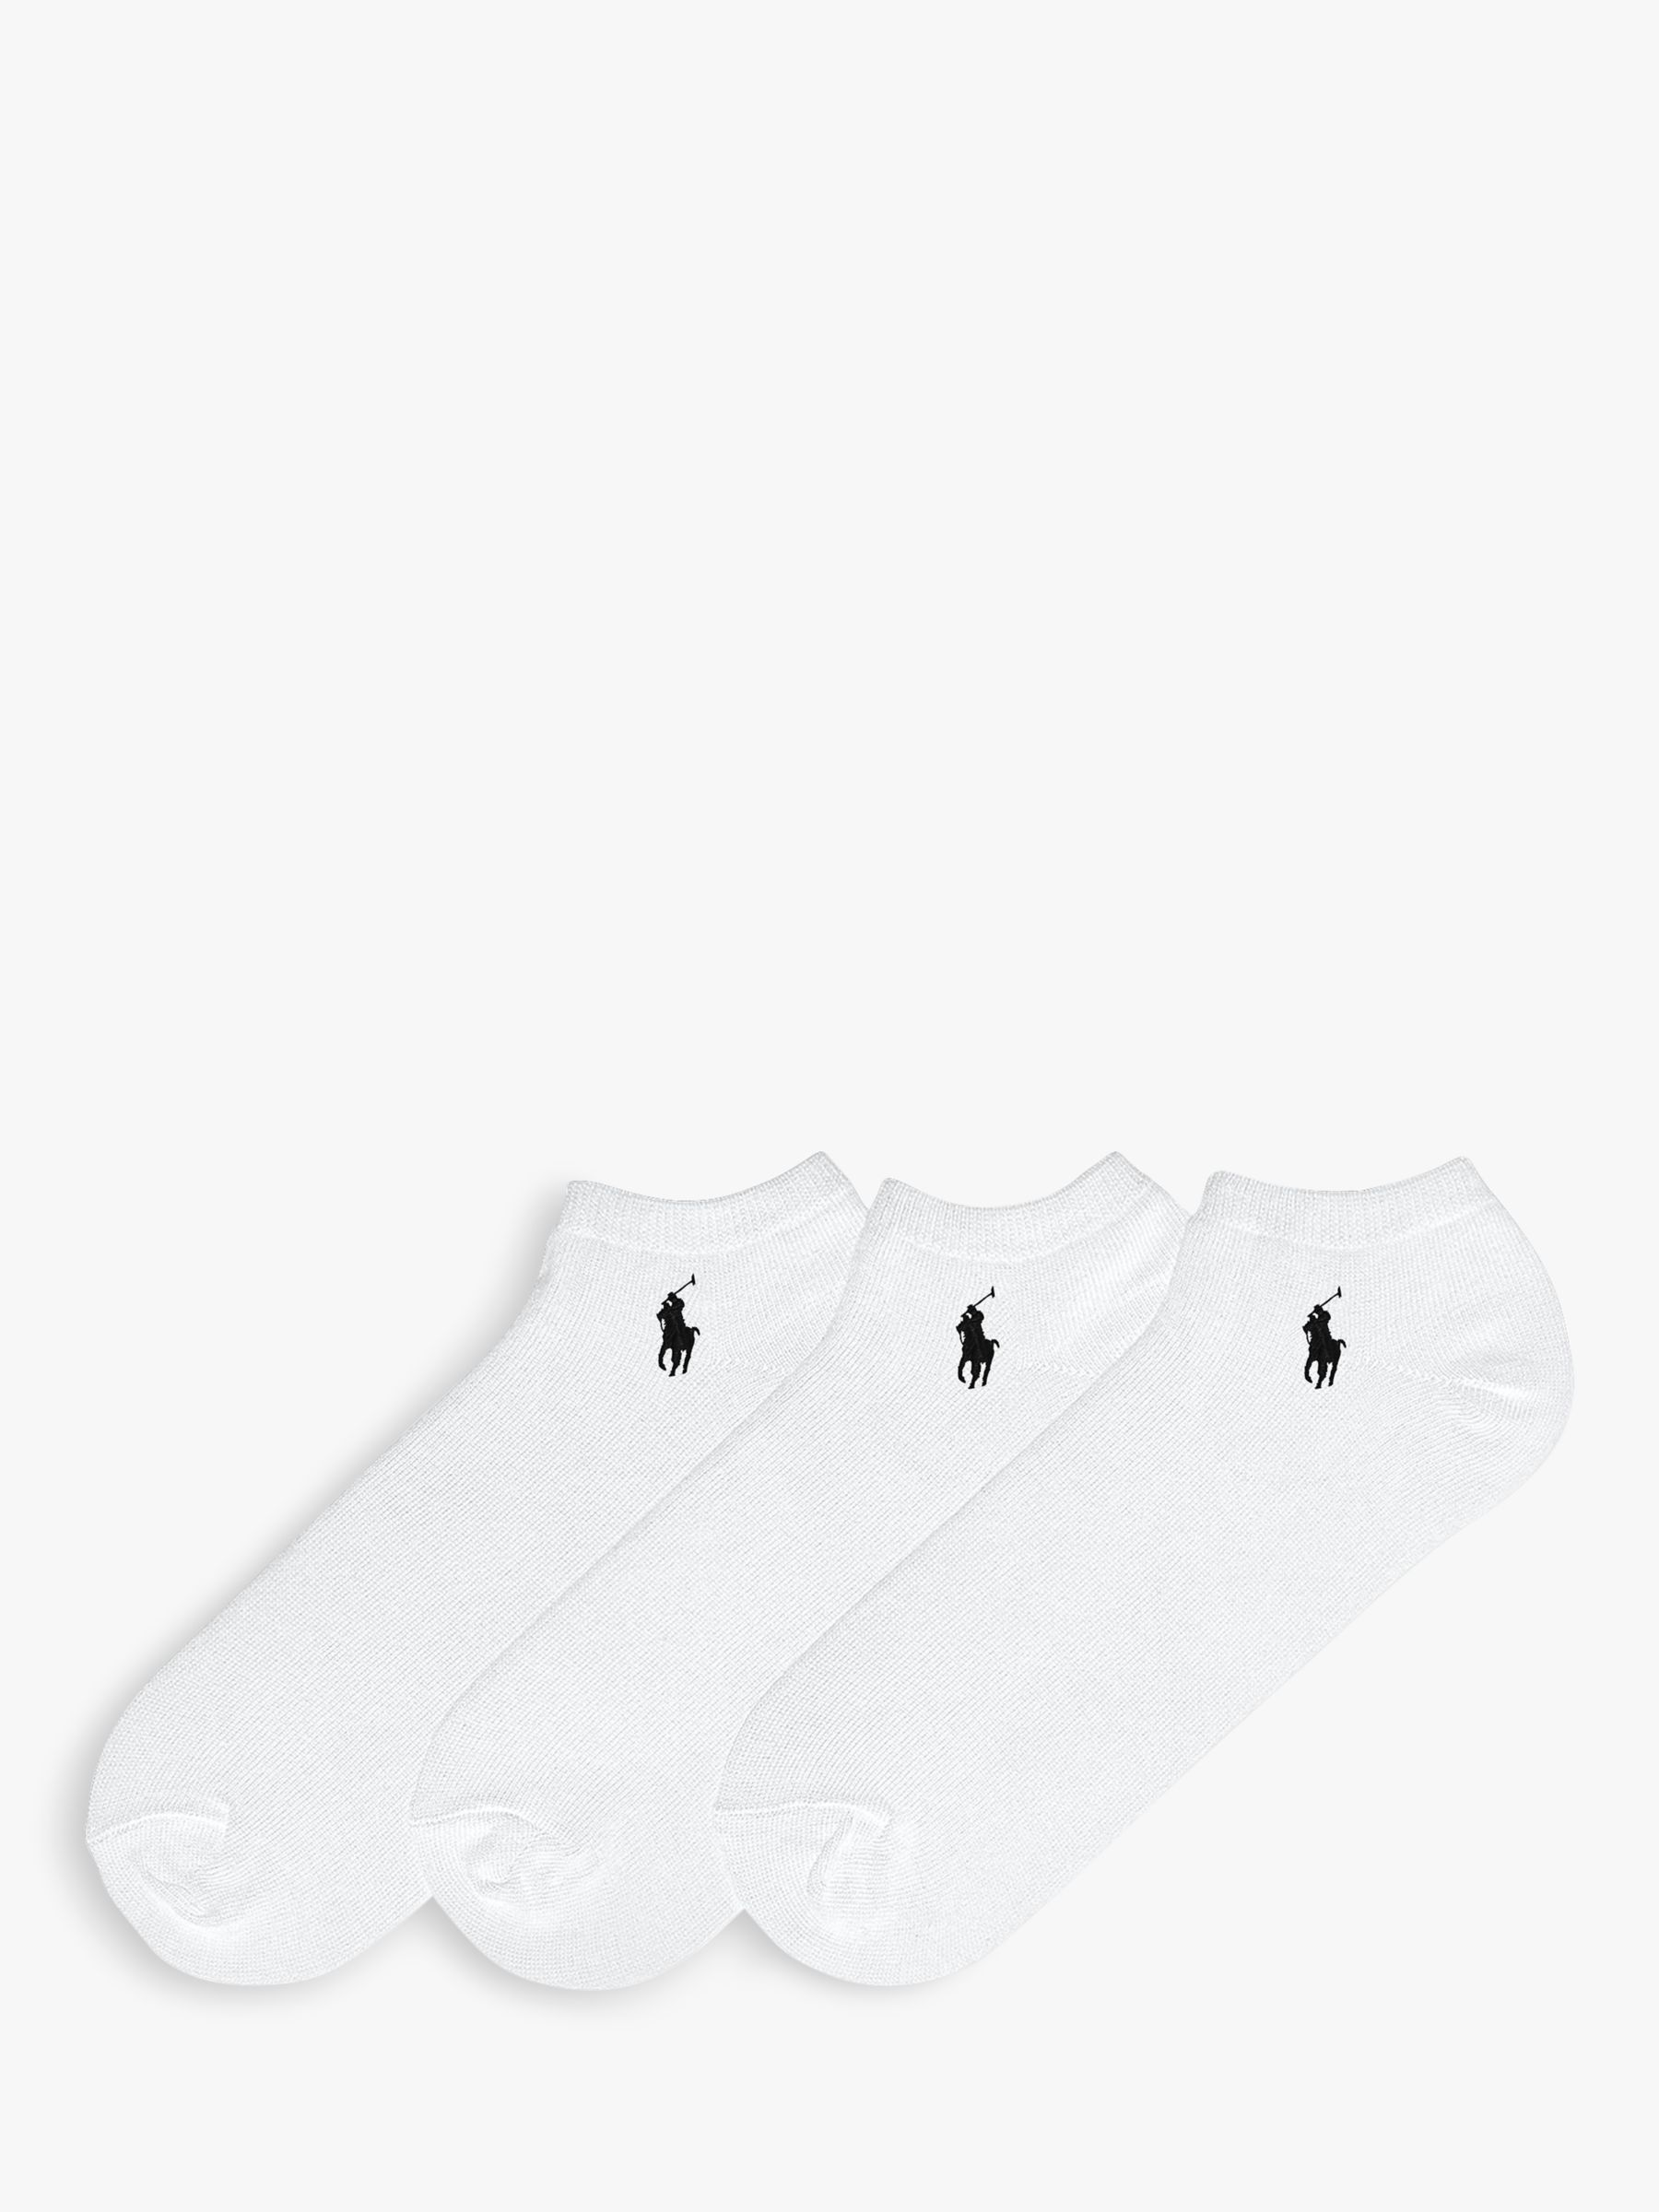 Polo Ralph Lauren Trainer Socks, One Size, Pack of 3